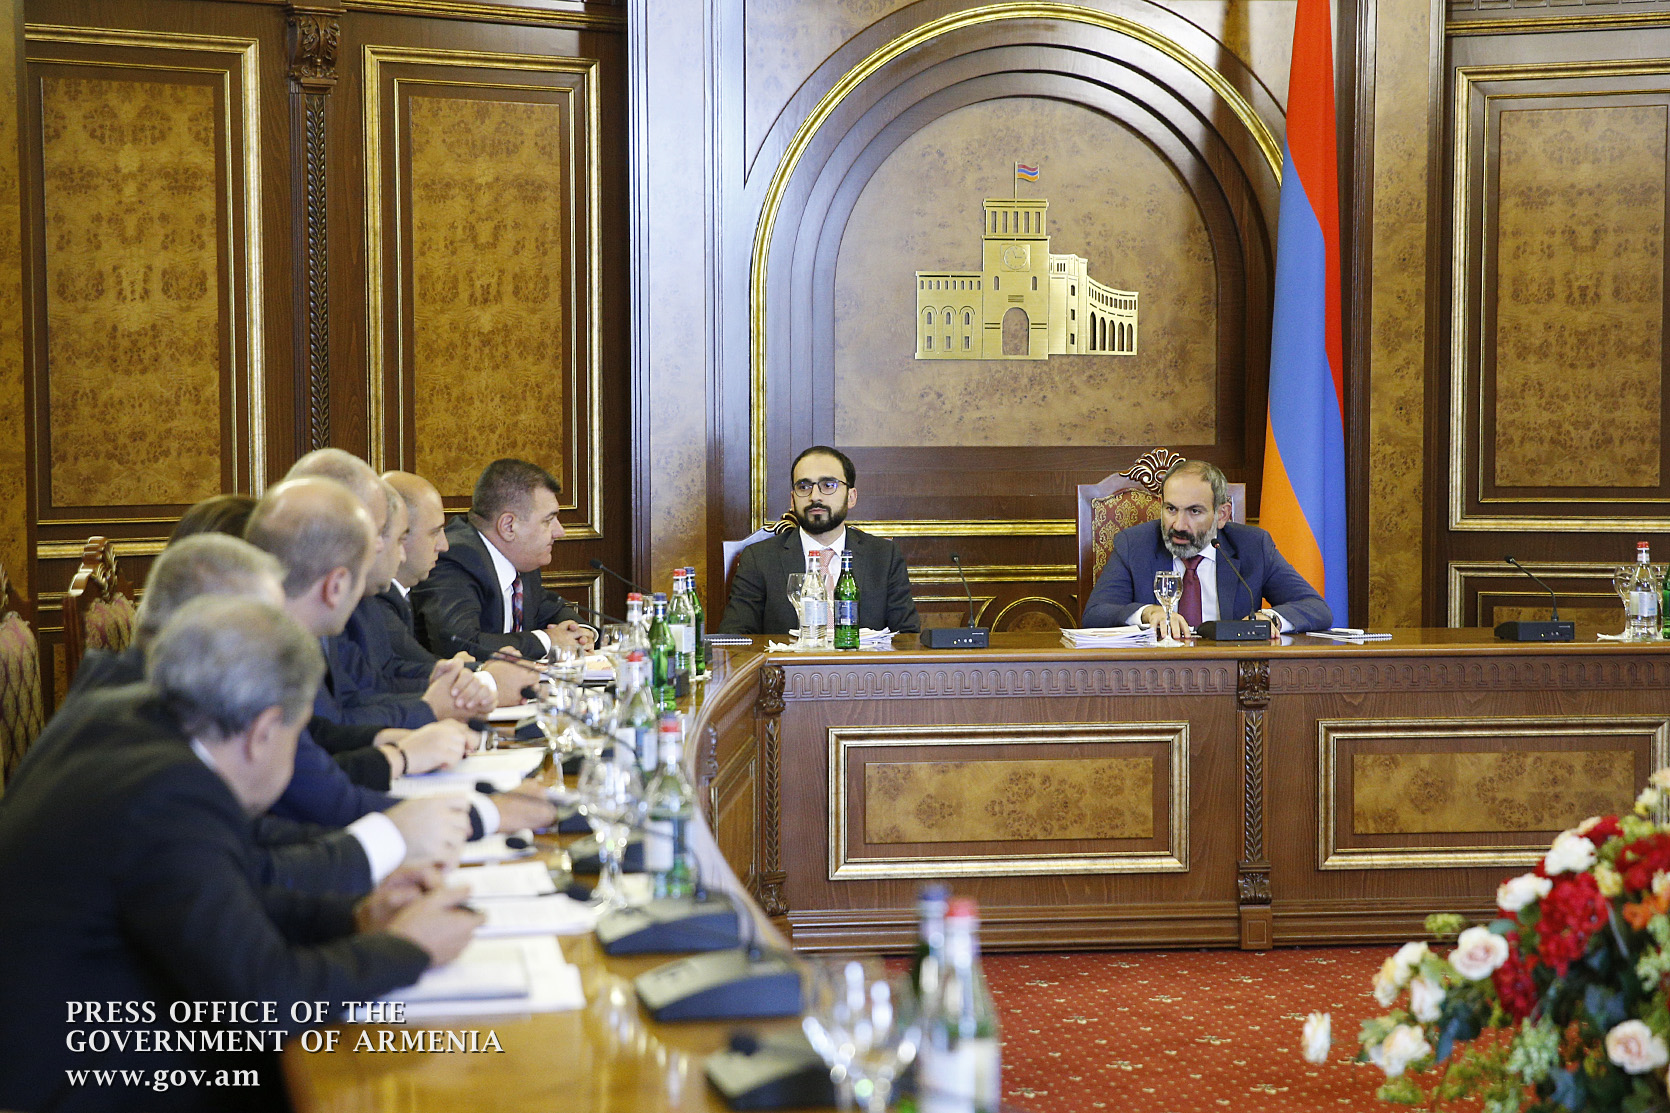 Nikol Pashinyan: ‘Roads of dubious quality should not be built under my government’